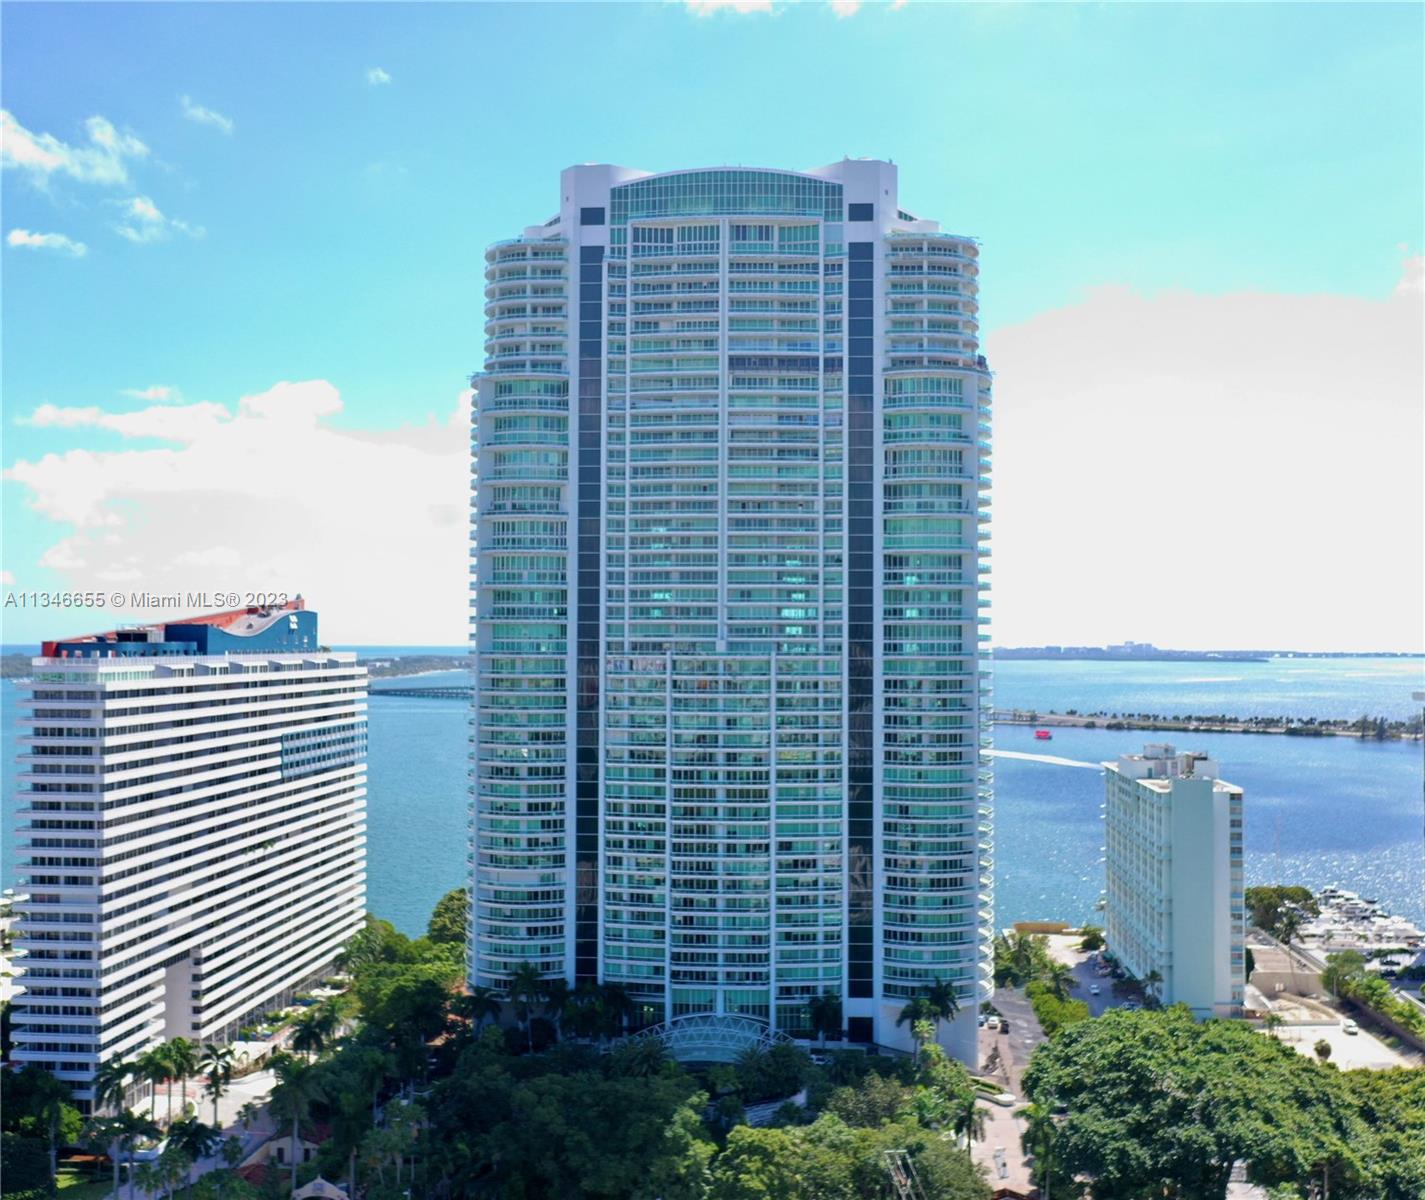 BEST BRICKELL LOCATION!THE ICONIC AND LUXURIOUS SANTA MARIA ON BRICKELL AVENUE. ENJOY DIRECT OCEAN VIEWS TO THE EAST, & EXCITING MIAMI SKYLINE WESTERLY. FROM THIS SPACIOUS 3 BEDROOM/4.5 BATH CONDO. THIS LANDMARK IS METICULOUSLY MAINTAINED AND HAS A VERY FRIENDLY STAFF TO ASSIST YOU. YOUR NEW LIFESTYLE INCLUDES A BAYFRONT POOL, MARINA,STUNNING FITNESS CENTER ON THE 51ST FLOOR, 6000 SF, CLUBHOUSE, BILLIARDS ROOM AND QUAINT RESTAURANT. BUYING AT SANTA MARIA IS ALWAYS A SOUND INVESTMENT.